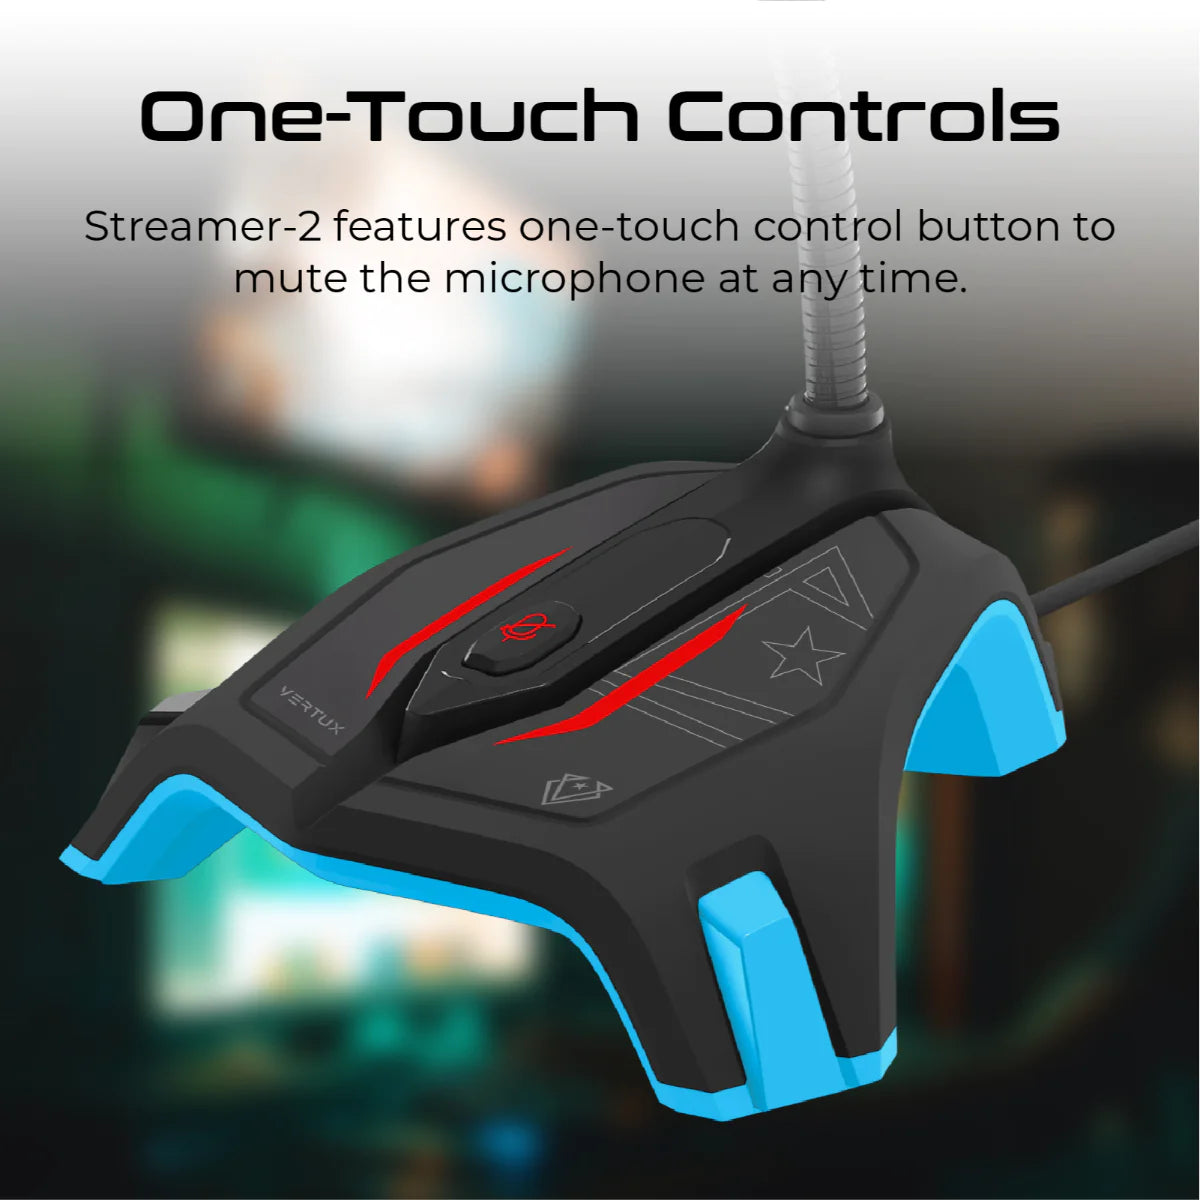 Vertux Streamer-2 Omni-Directional Distortion Free Gaming Microphone - Blue